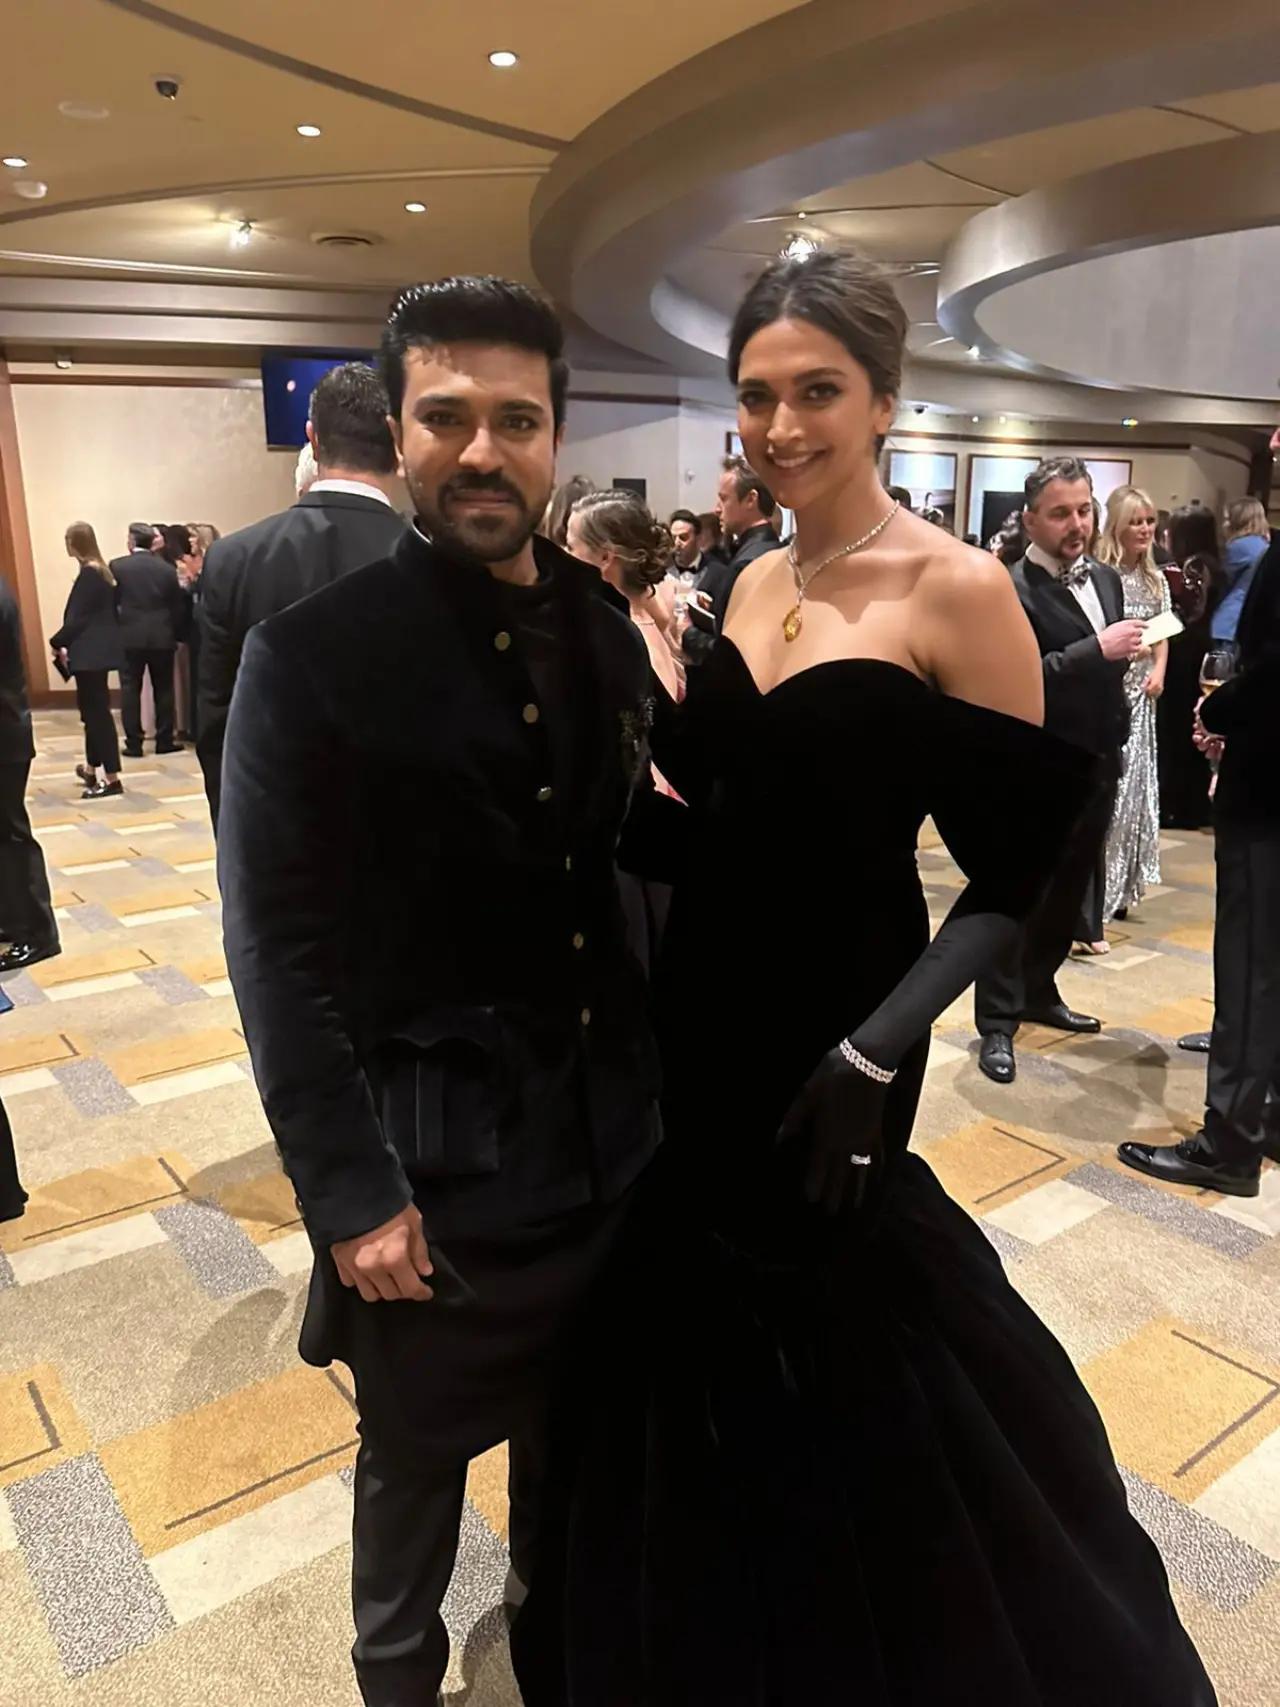 Deepika Padukone was at the ceremony as one of the presenters. She introduced the song 'Naatu Naatu' ahead of its live performance on stage. She also posed with RRR star Ram Charan on the red carpet